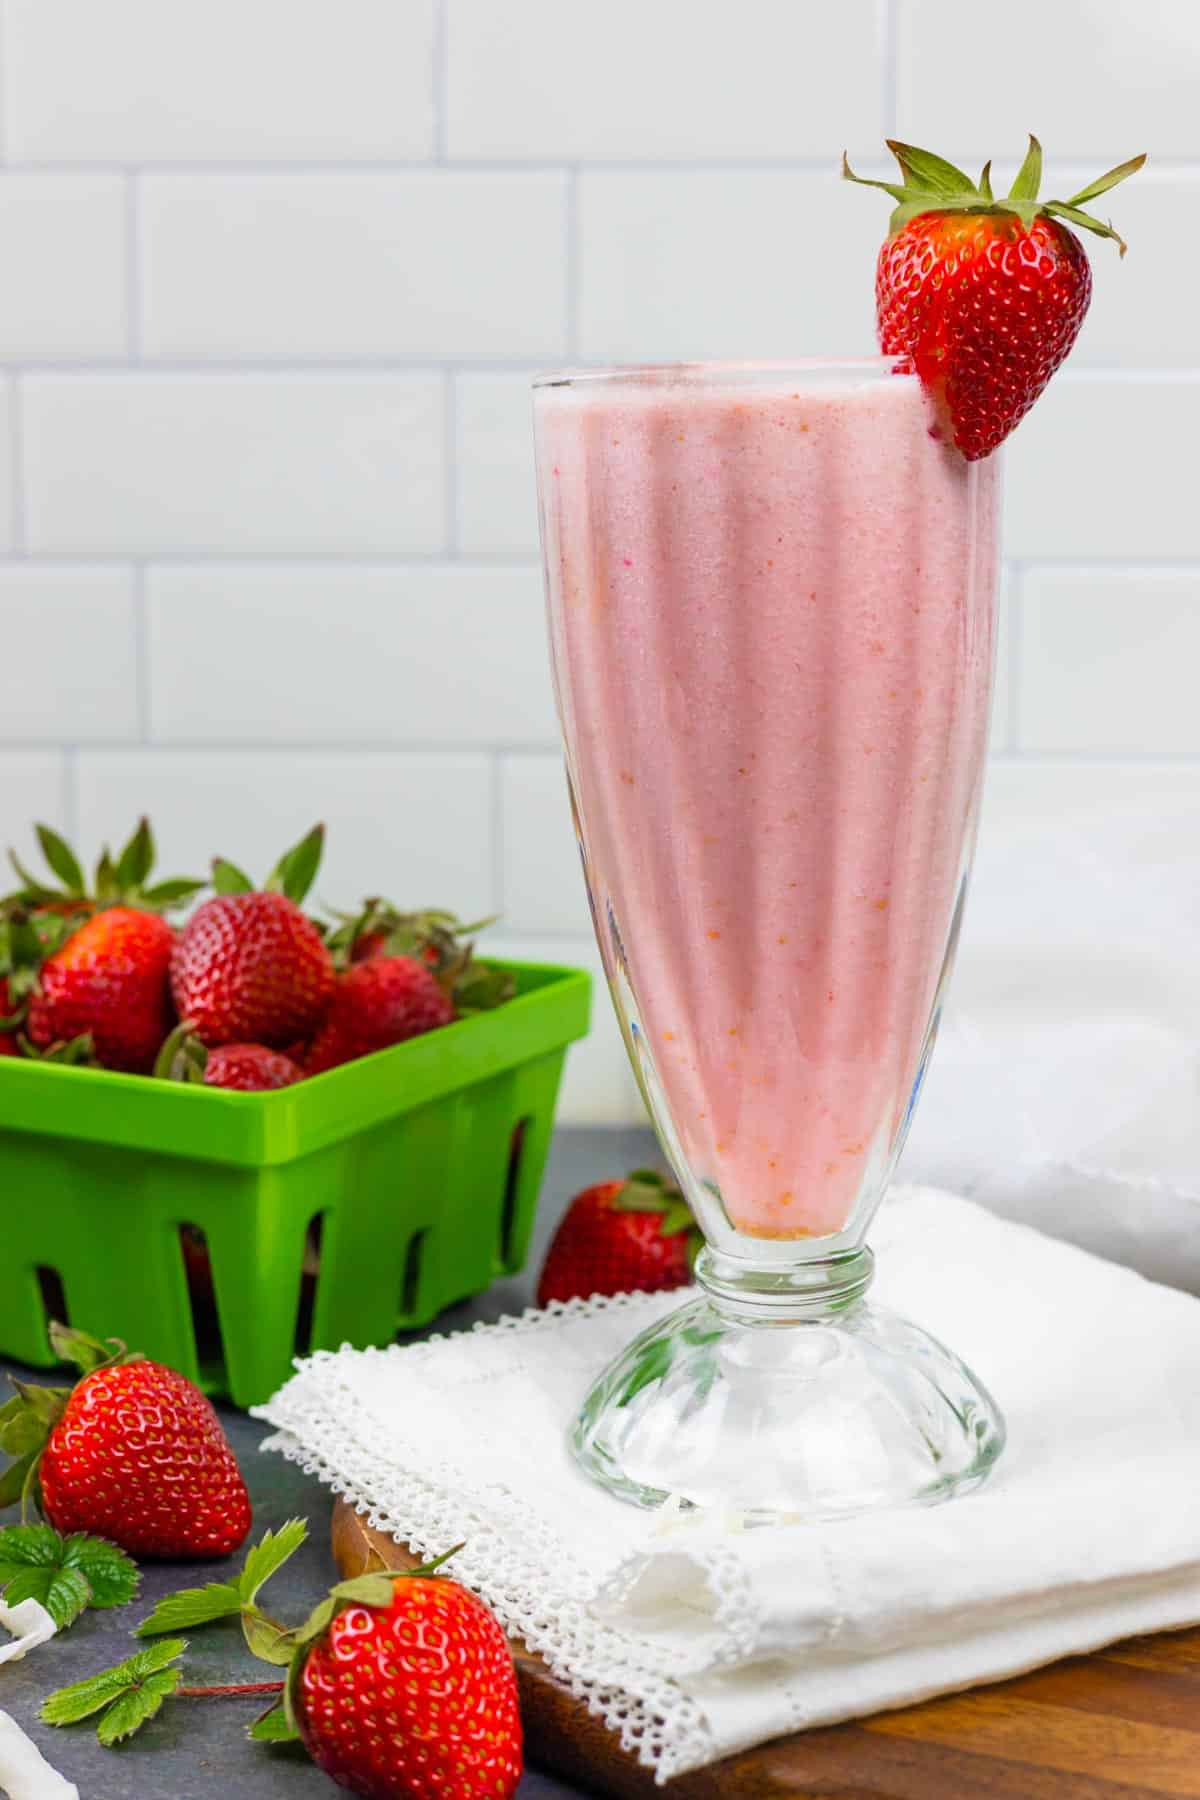 Shake glass of strawberry almond milk smoothie with a berry on the rim and a container of berries next to the glass.